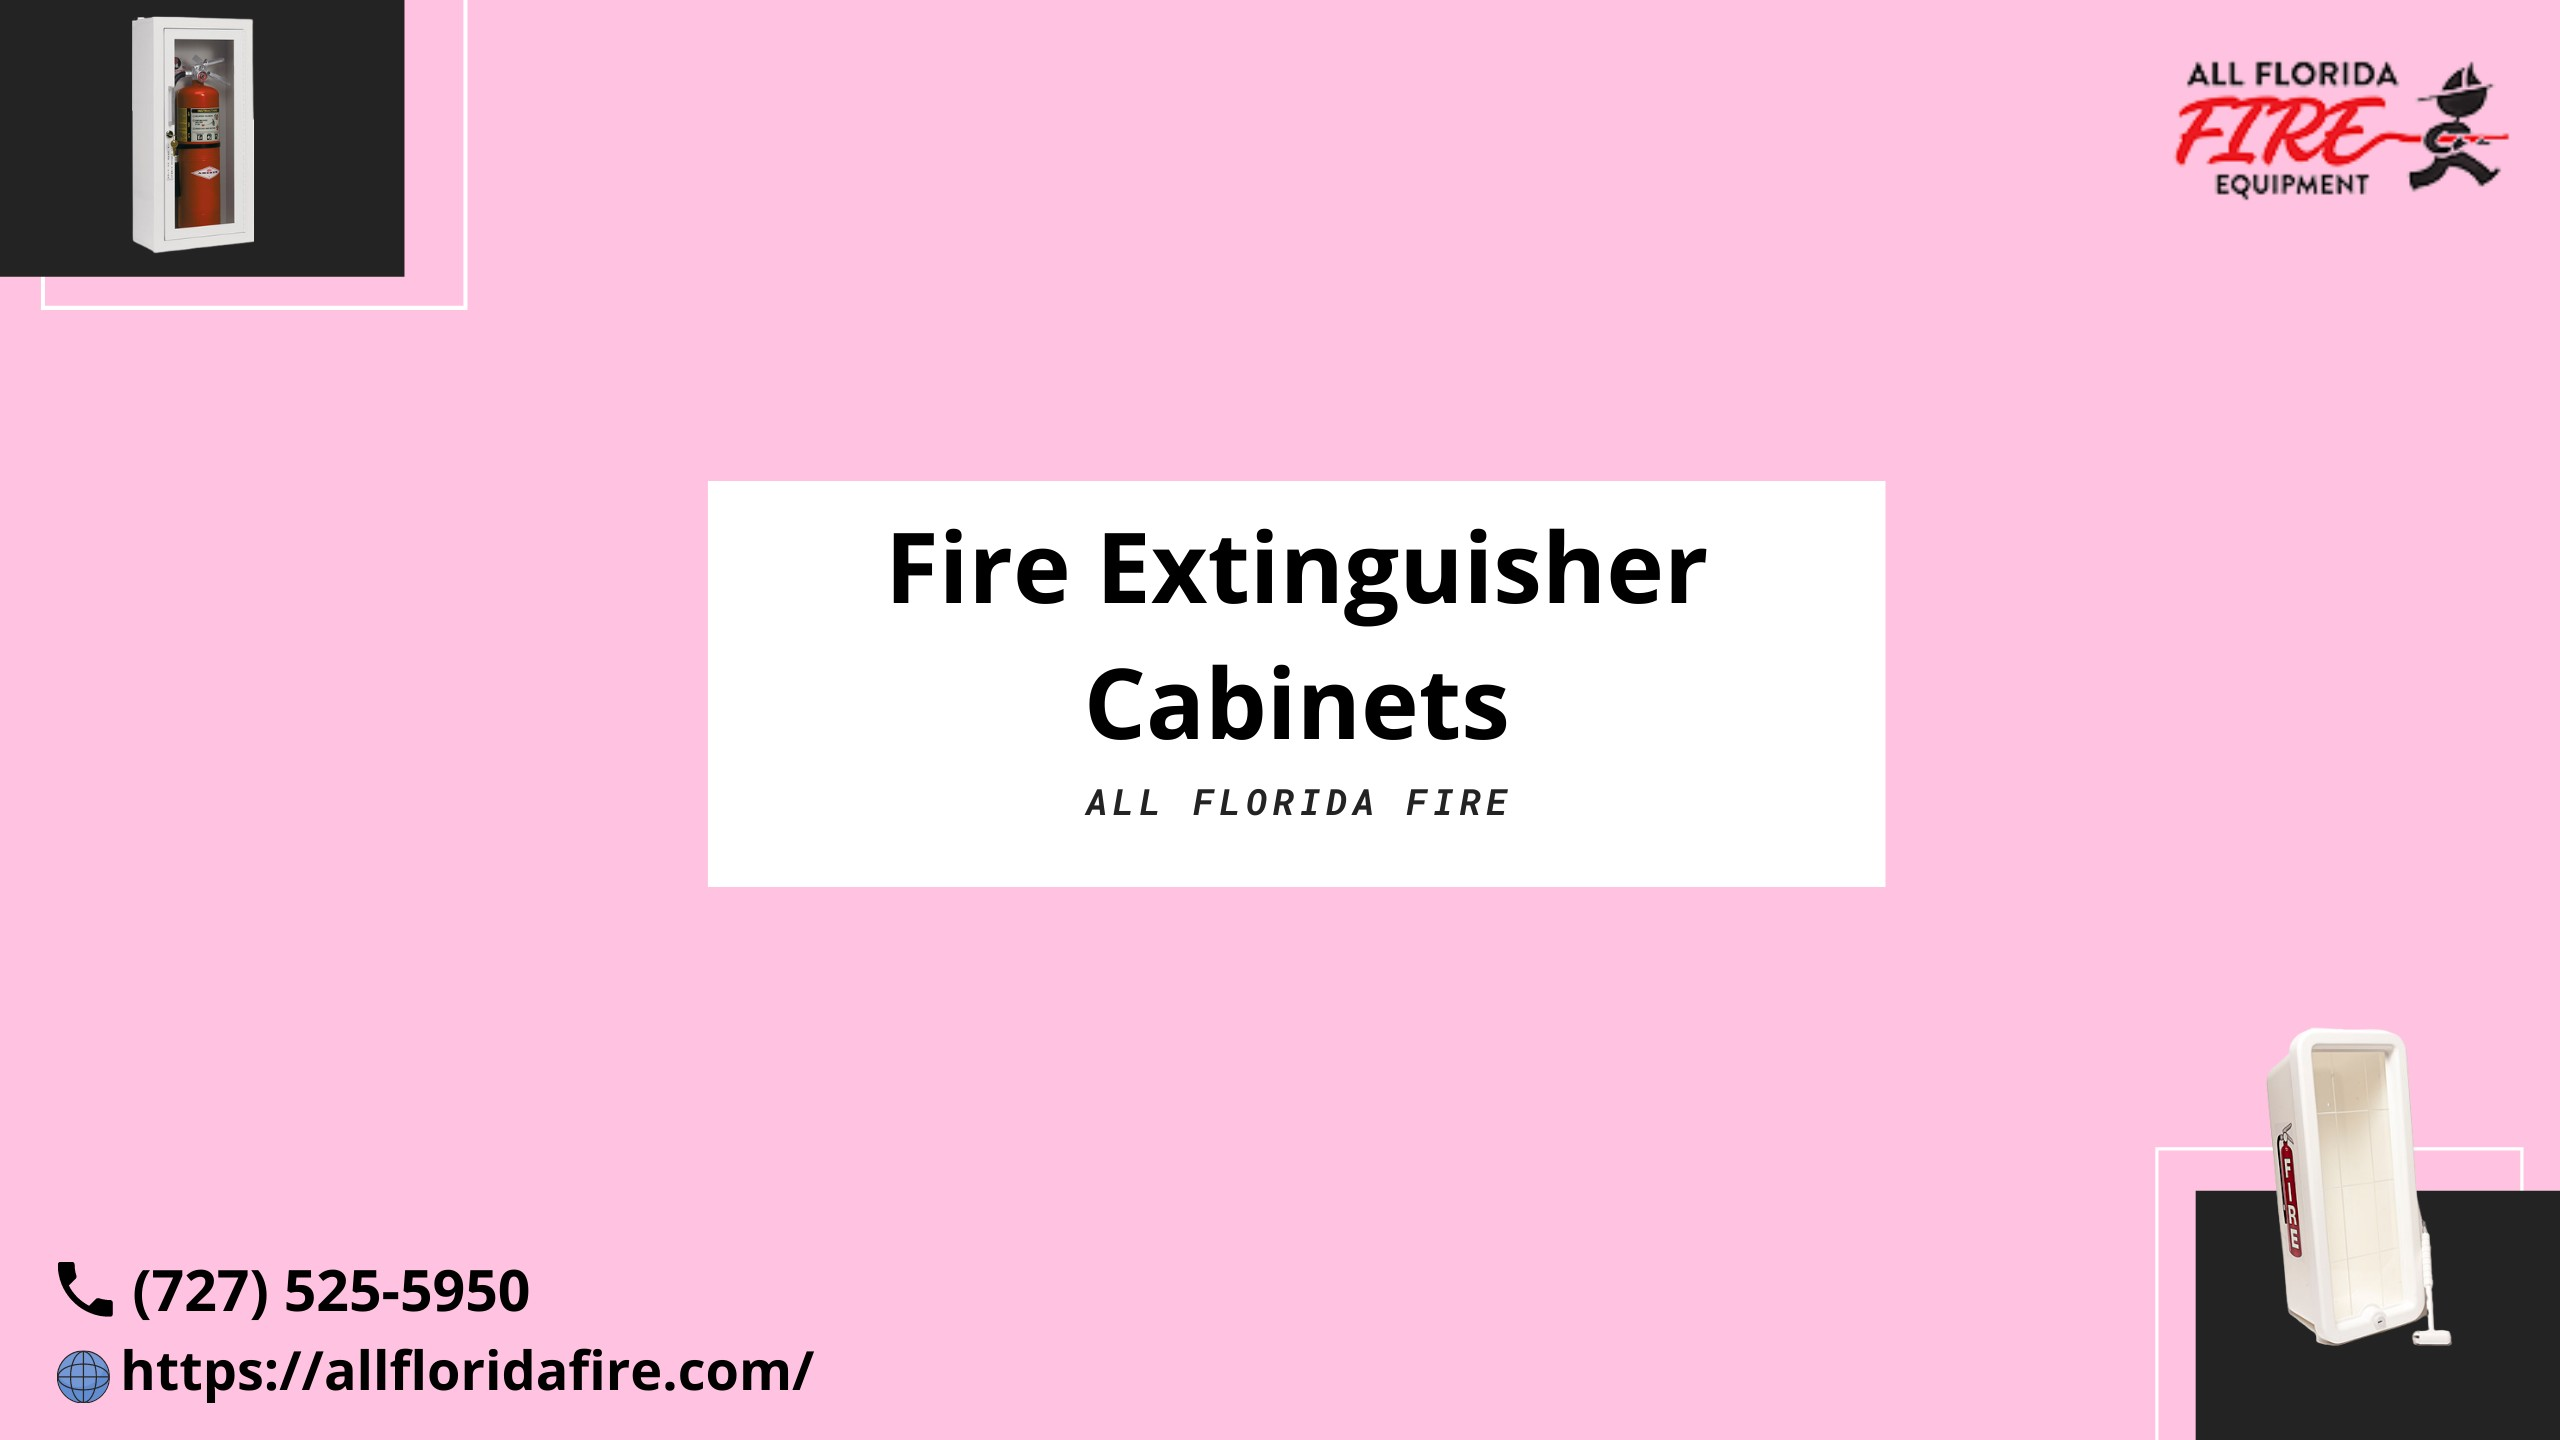 Fire Extinguisher Cabinets - All Florida Fire